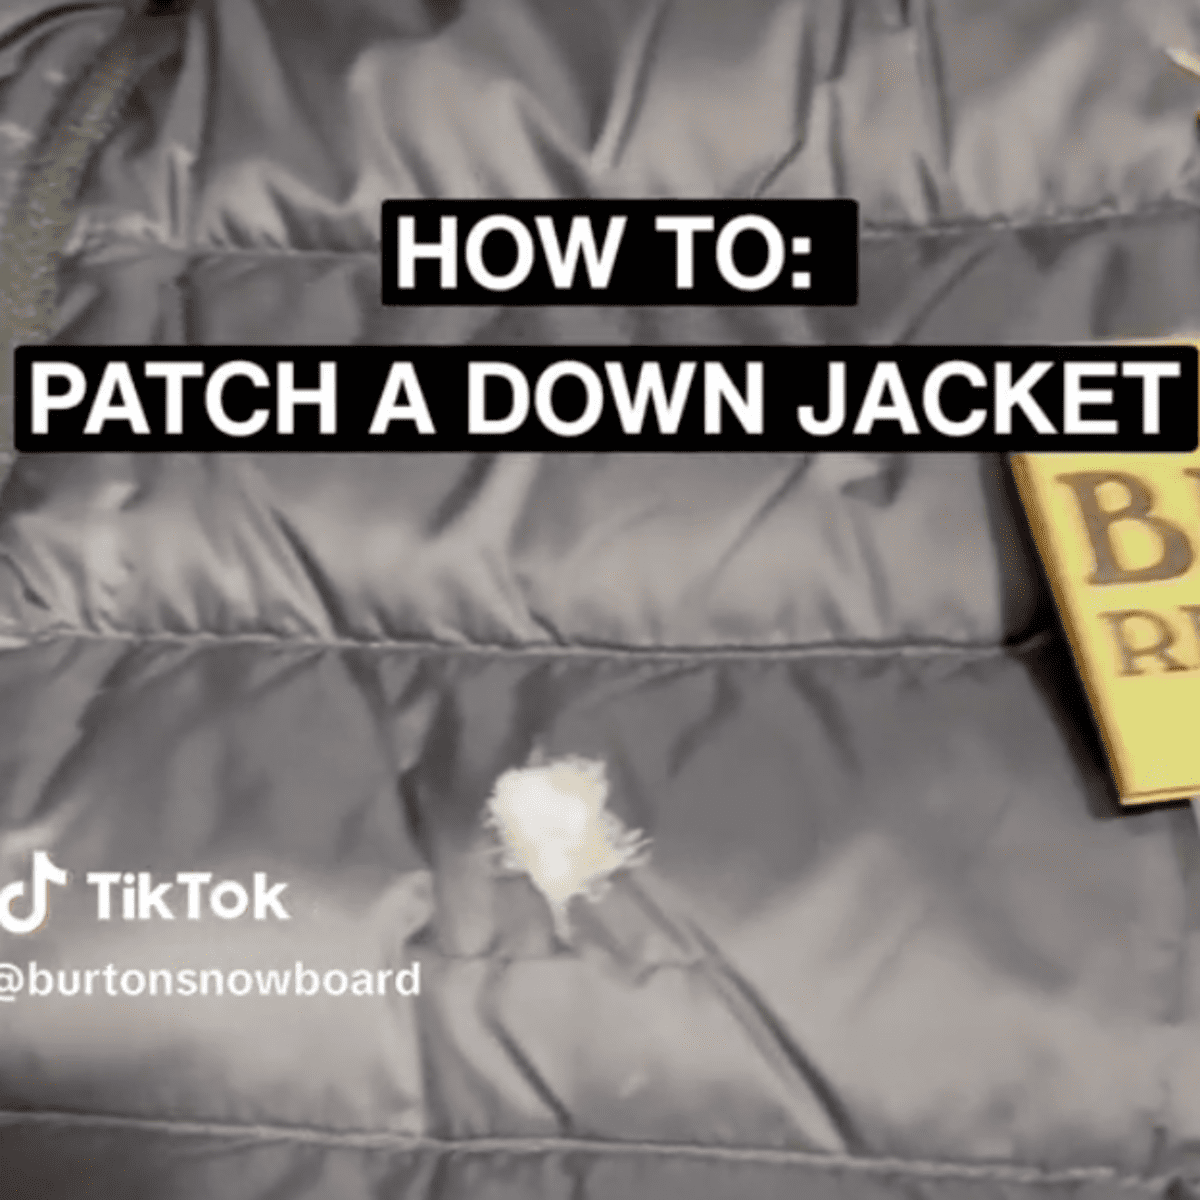 How do you fix a hole in a down jacket? 